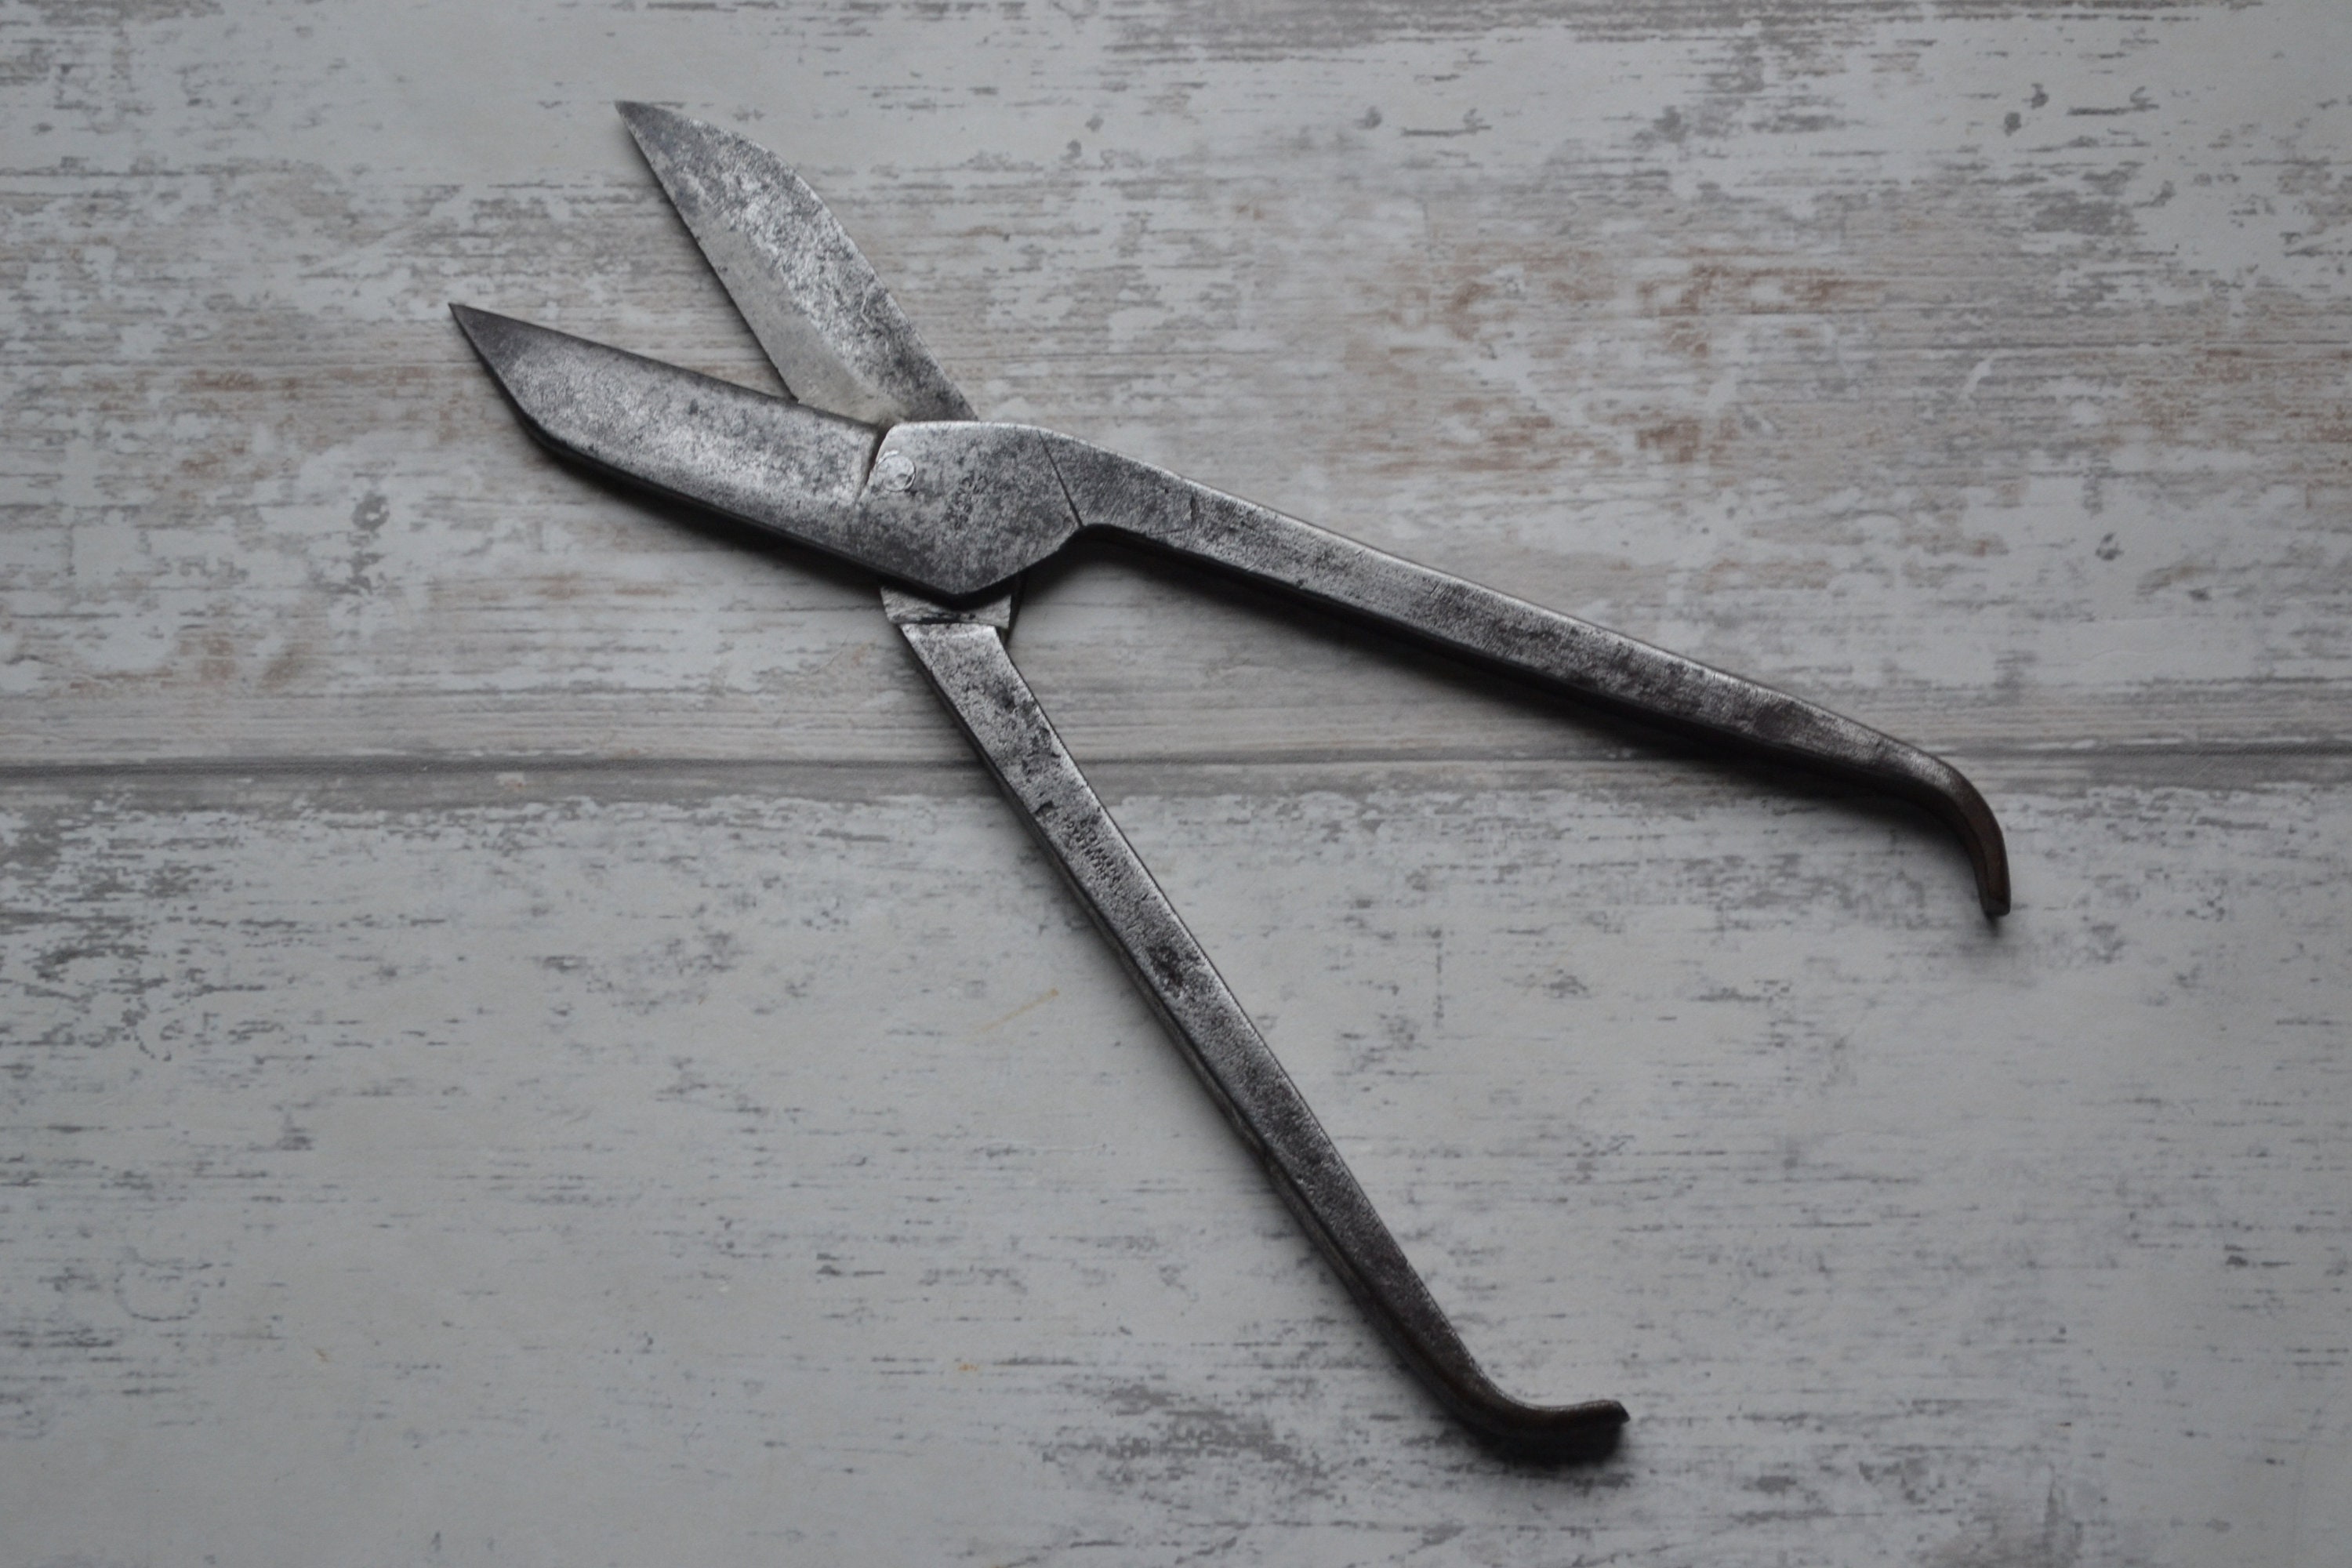 Antique Industrial Metal Shears Tin Snips Giant Scissors Weathered Red  Paint Nice Patina -  Finland